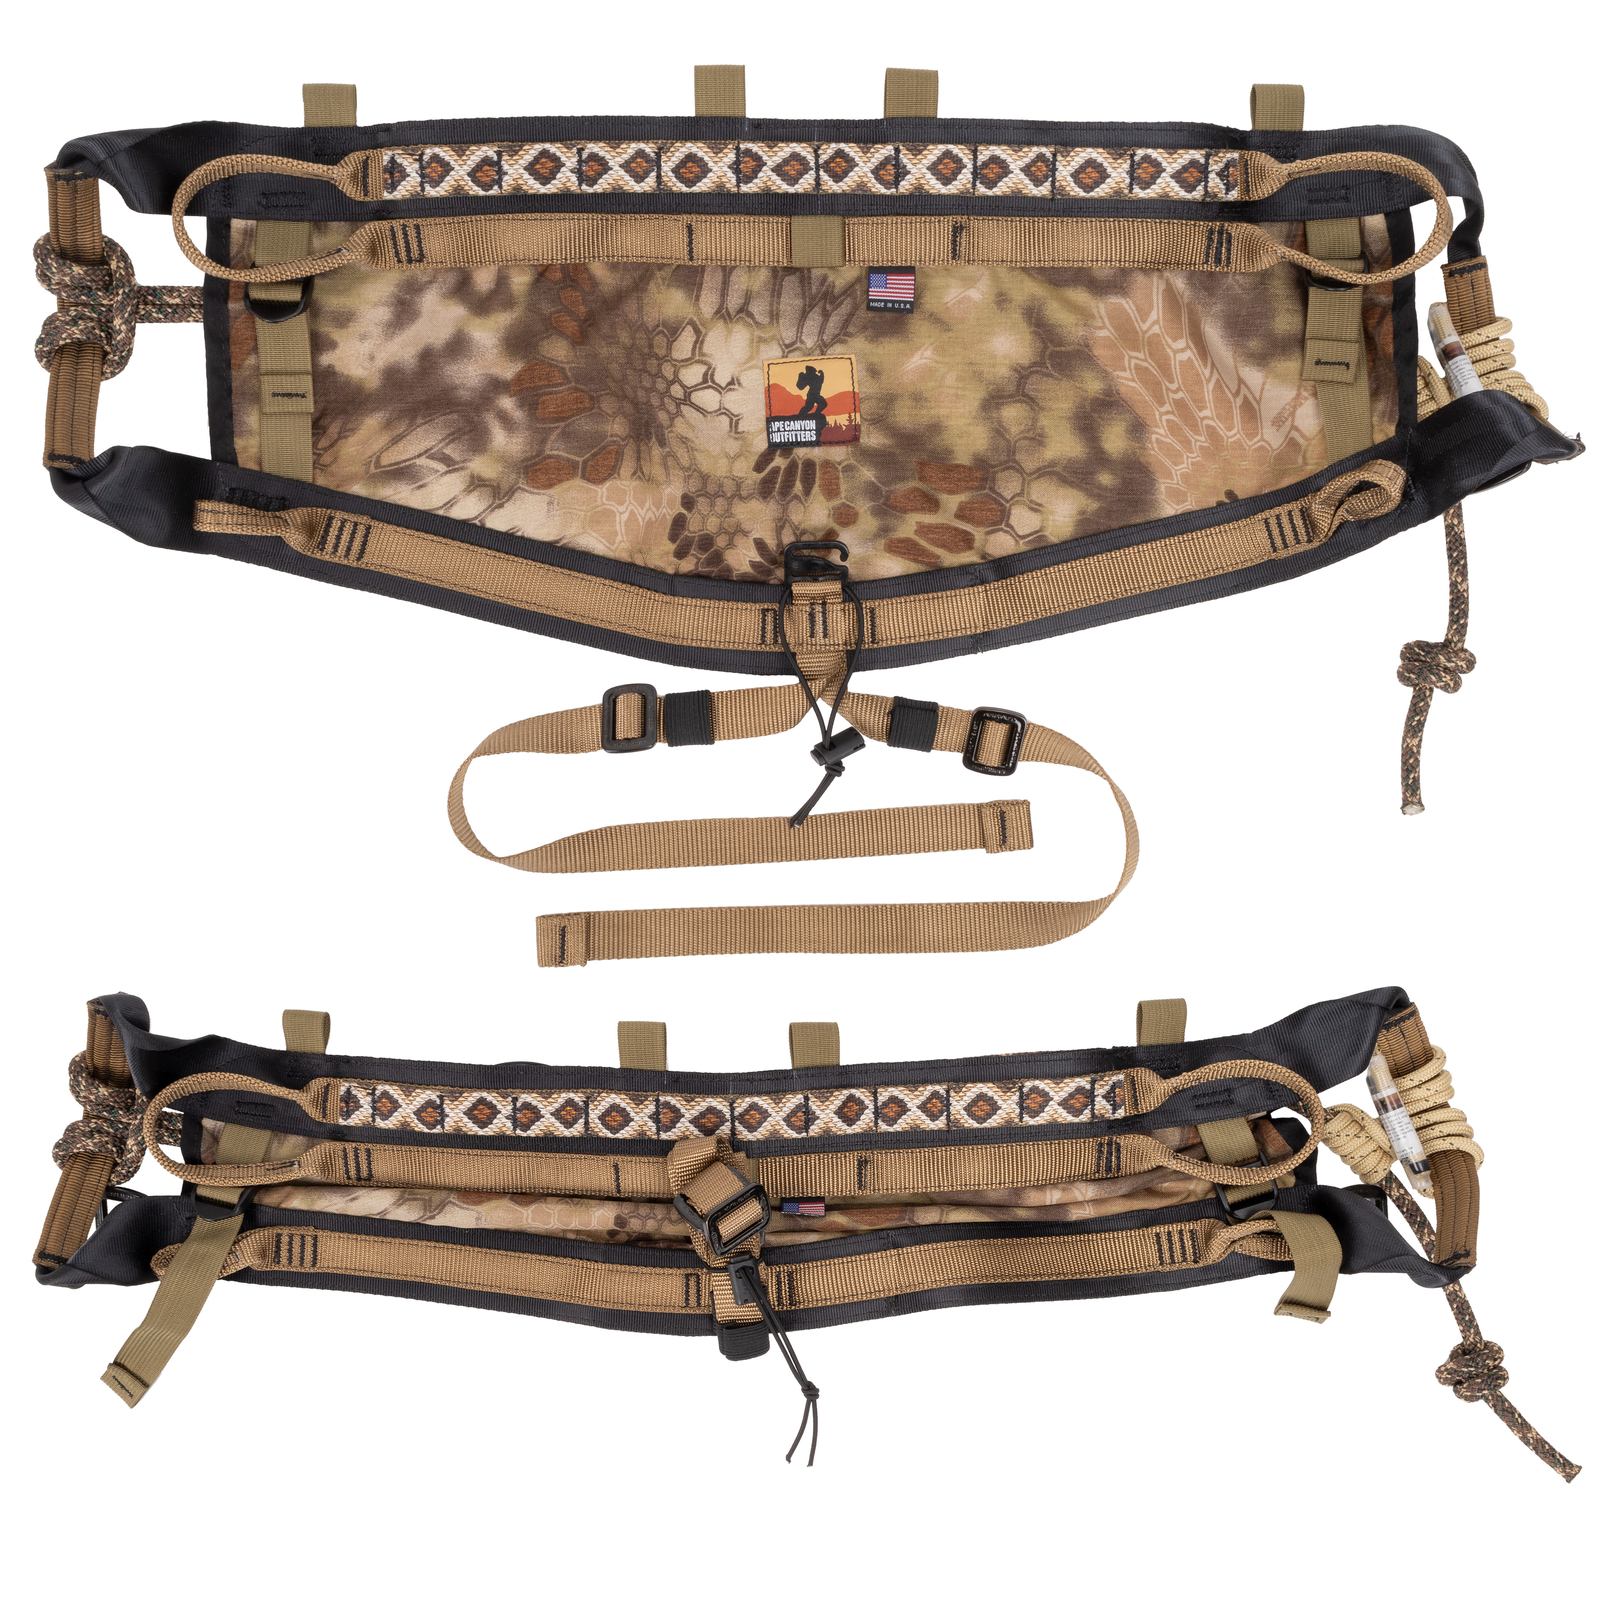 Ape Canyon Outfitters PIONEER MESH SADDLE